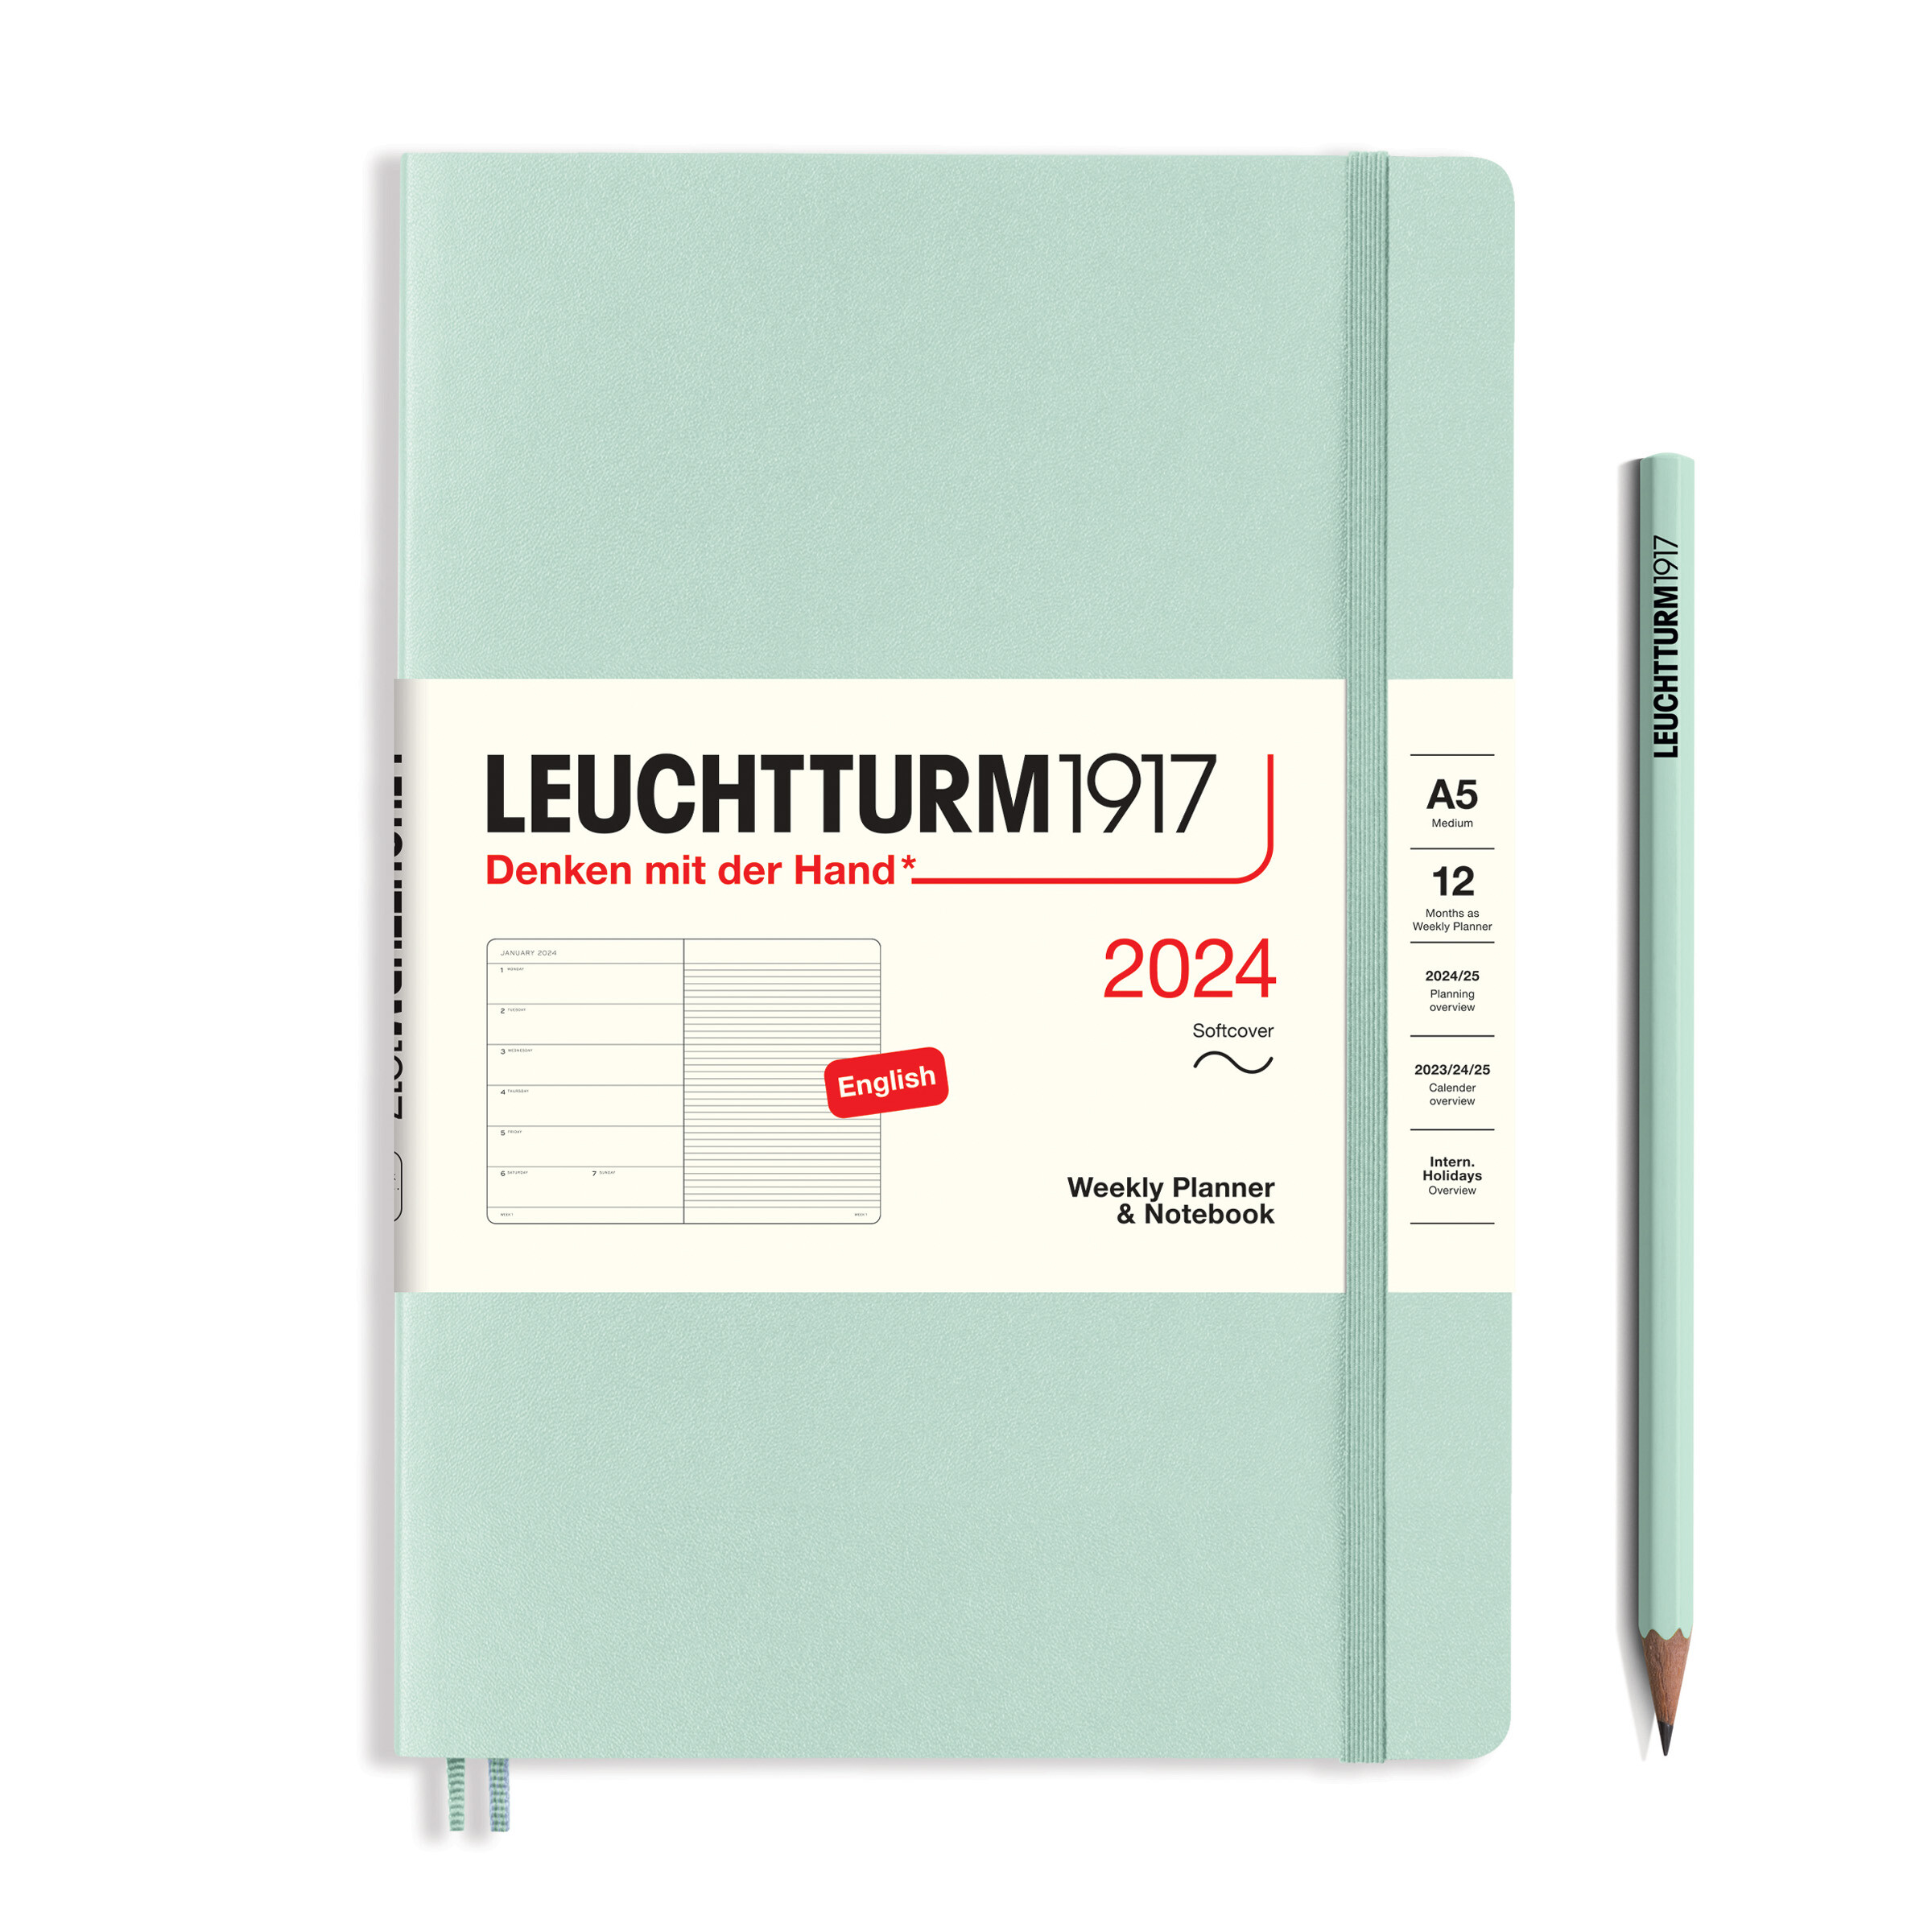 Leuchtturm1917 Weekly Planner & Notebook Soft Cover Medium A5 2024 - Pencraft the boutique